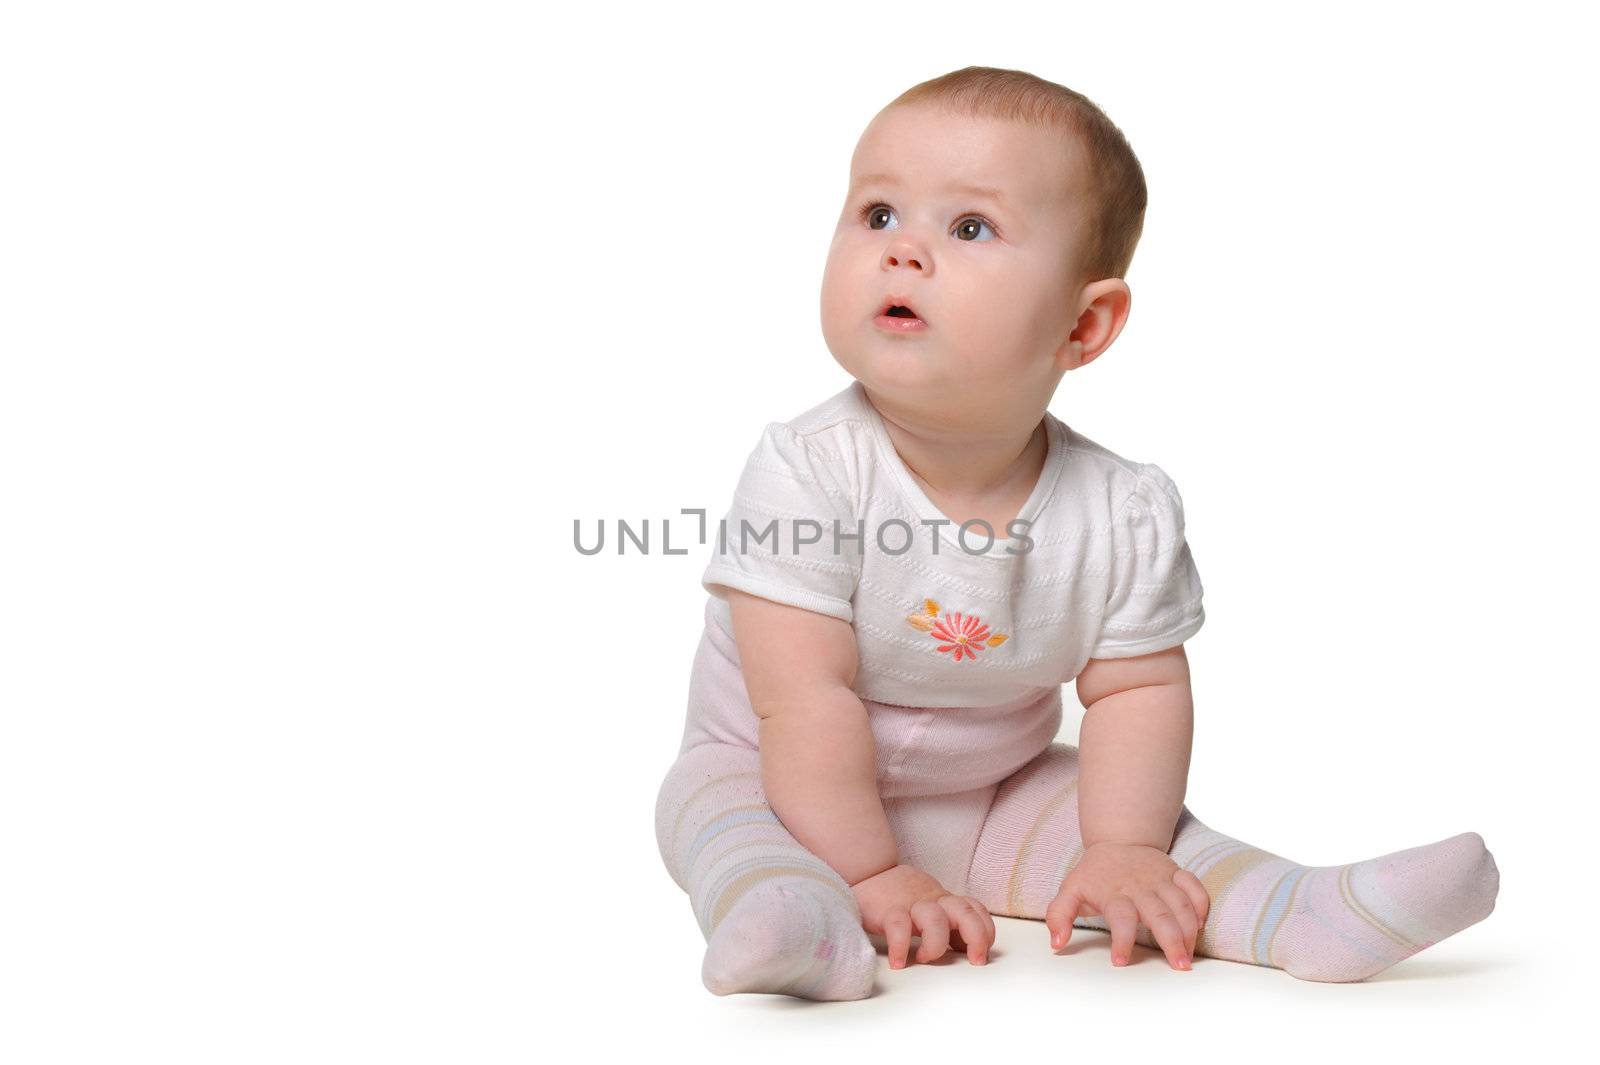 The baby. Age of 8 months. It is isolated on a white background